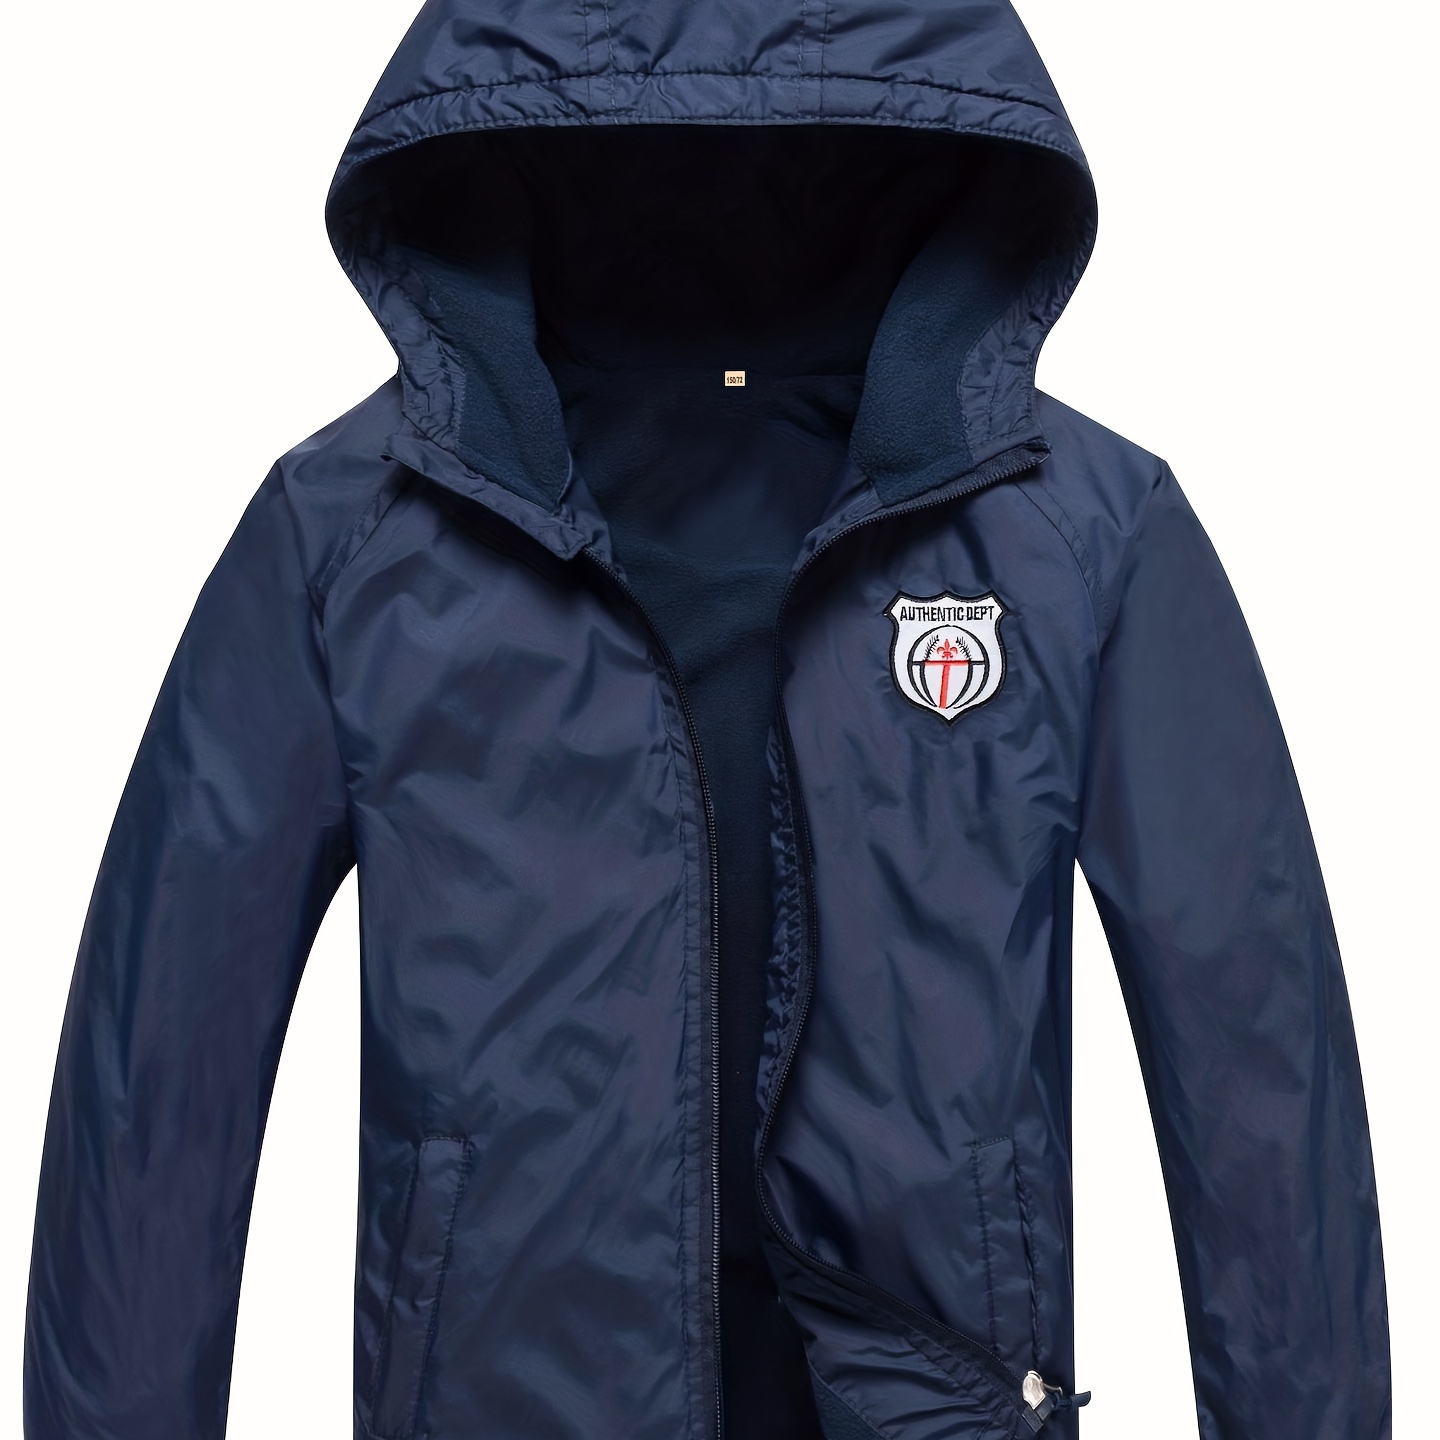 

Boys Zip Up Hooded Jacket Raincoat Windbreaker Outerwear For Spring Autumn And Winter Kids Clothes